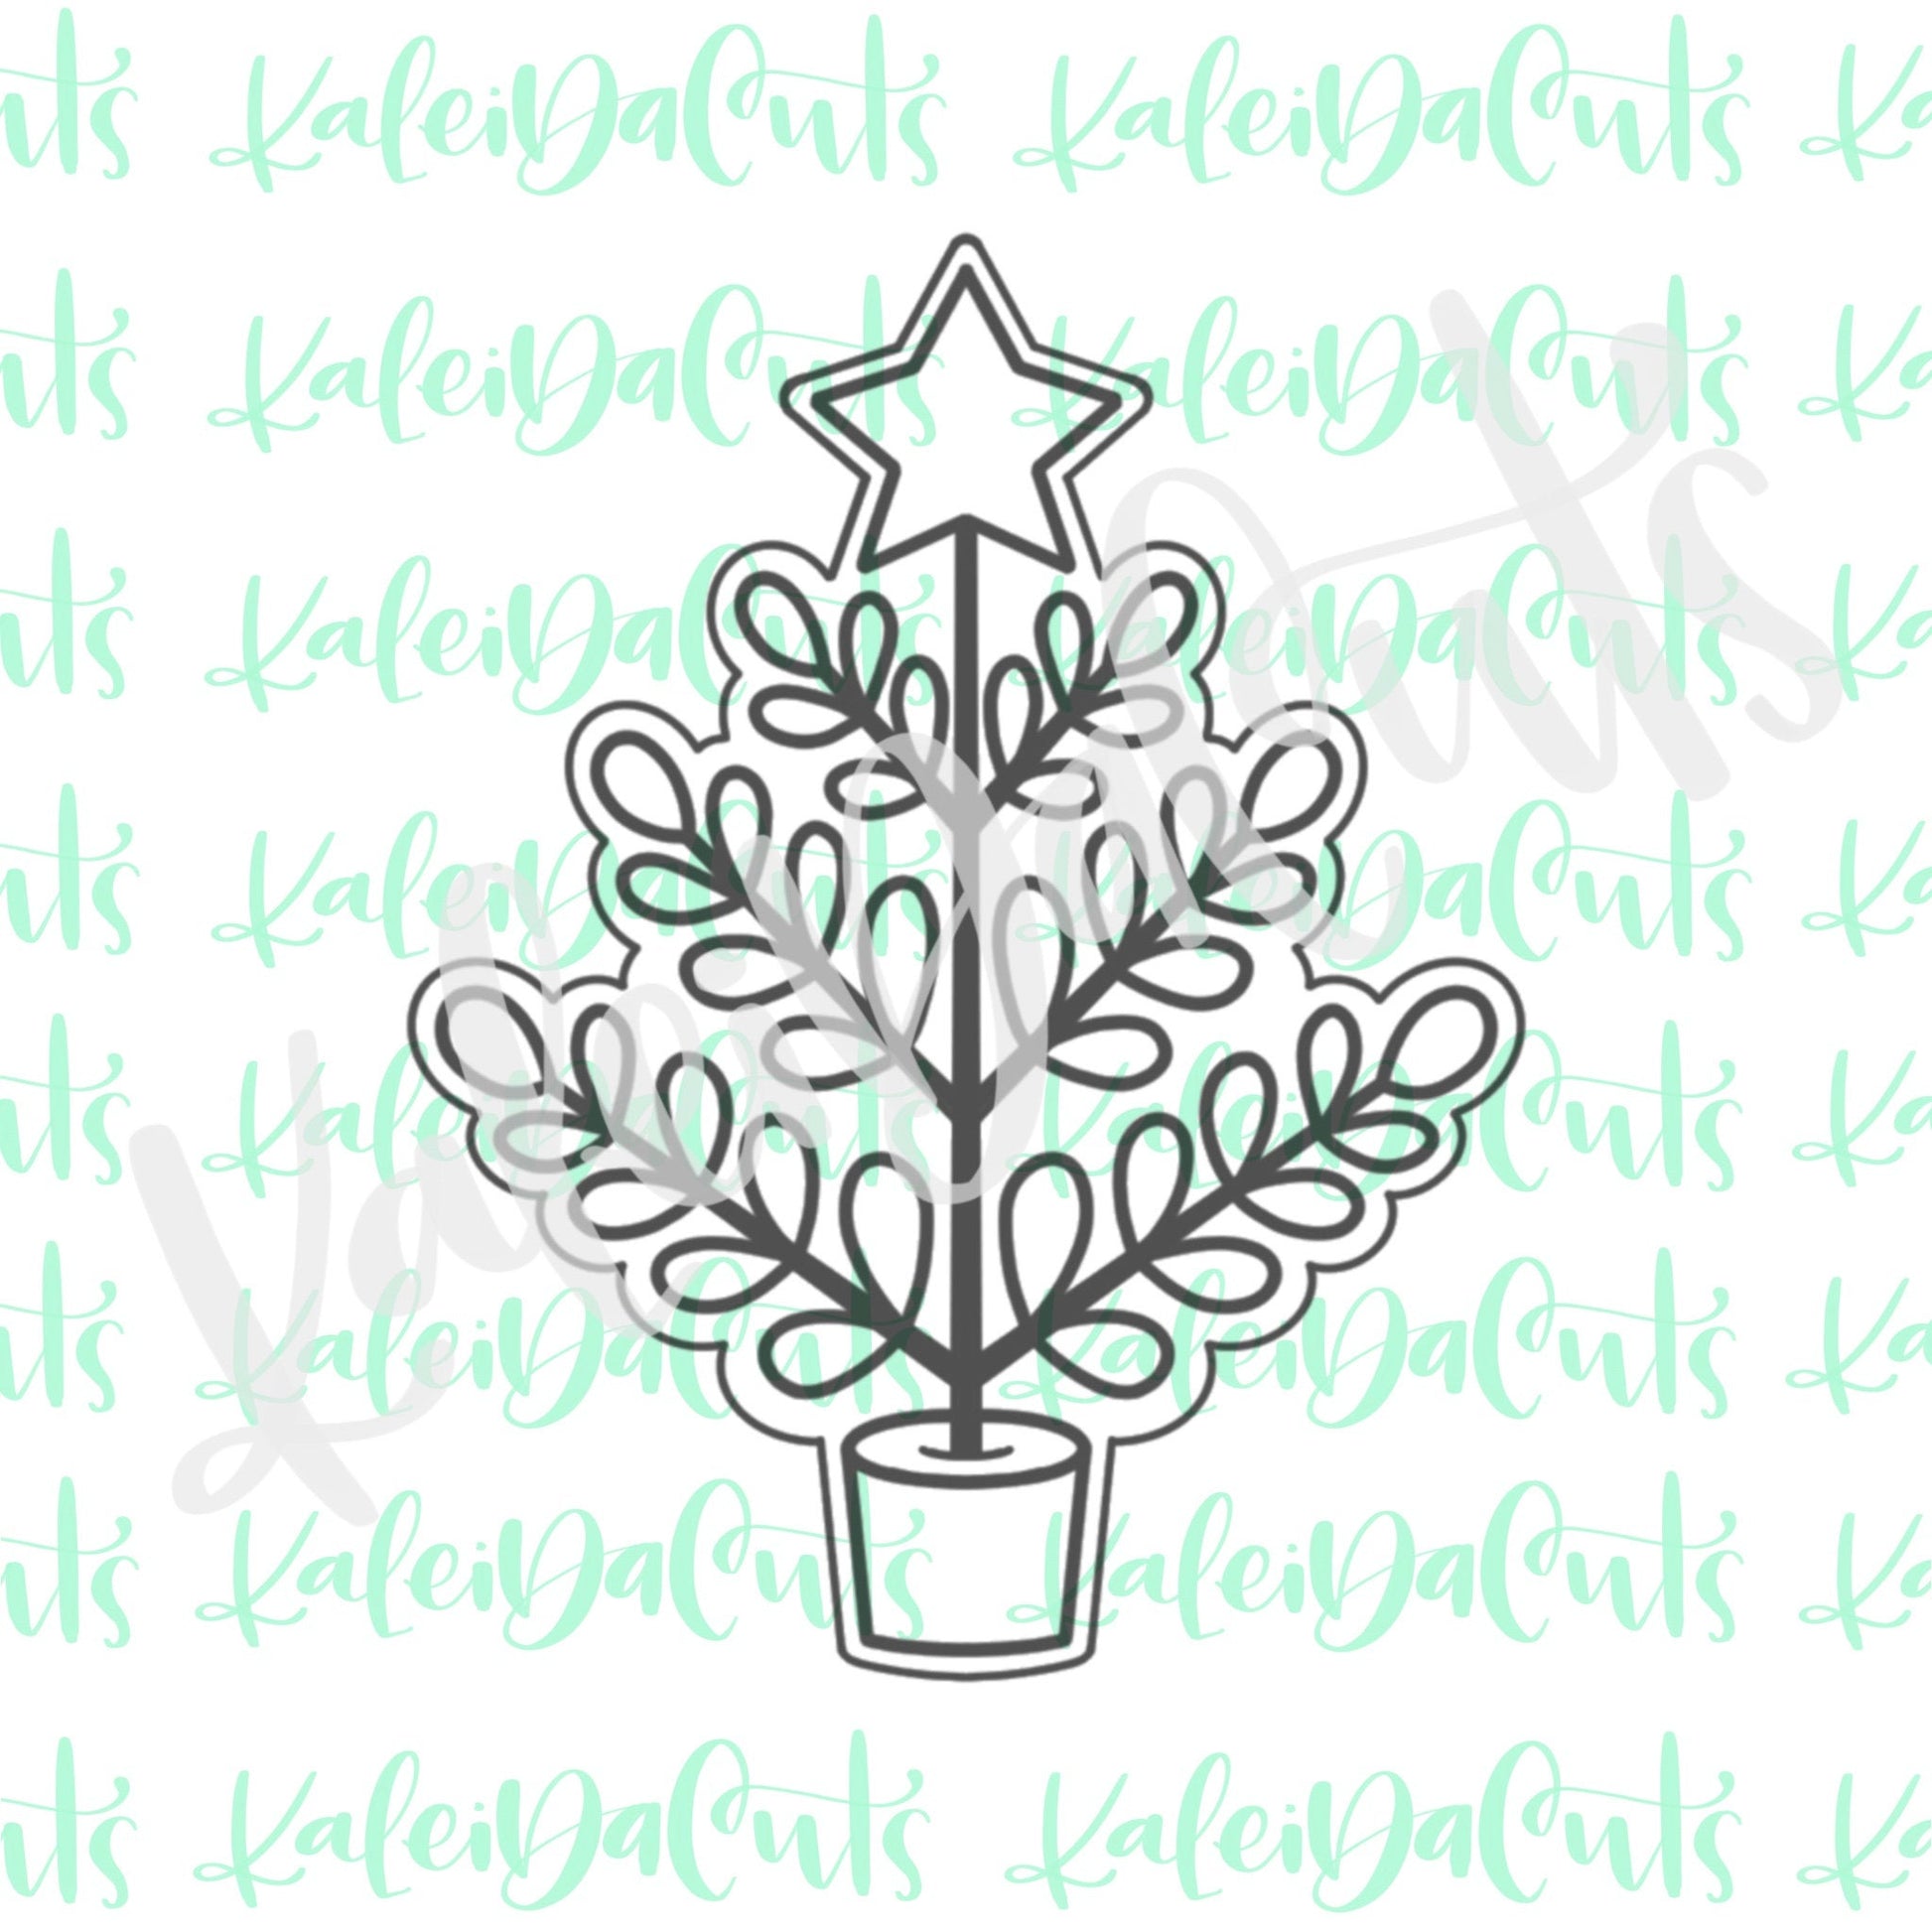 Leafy Christmas Tree Cookie Cutter